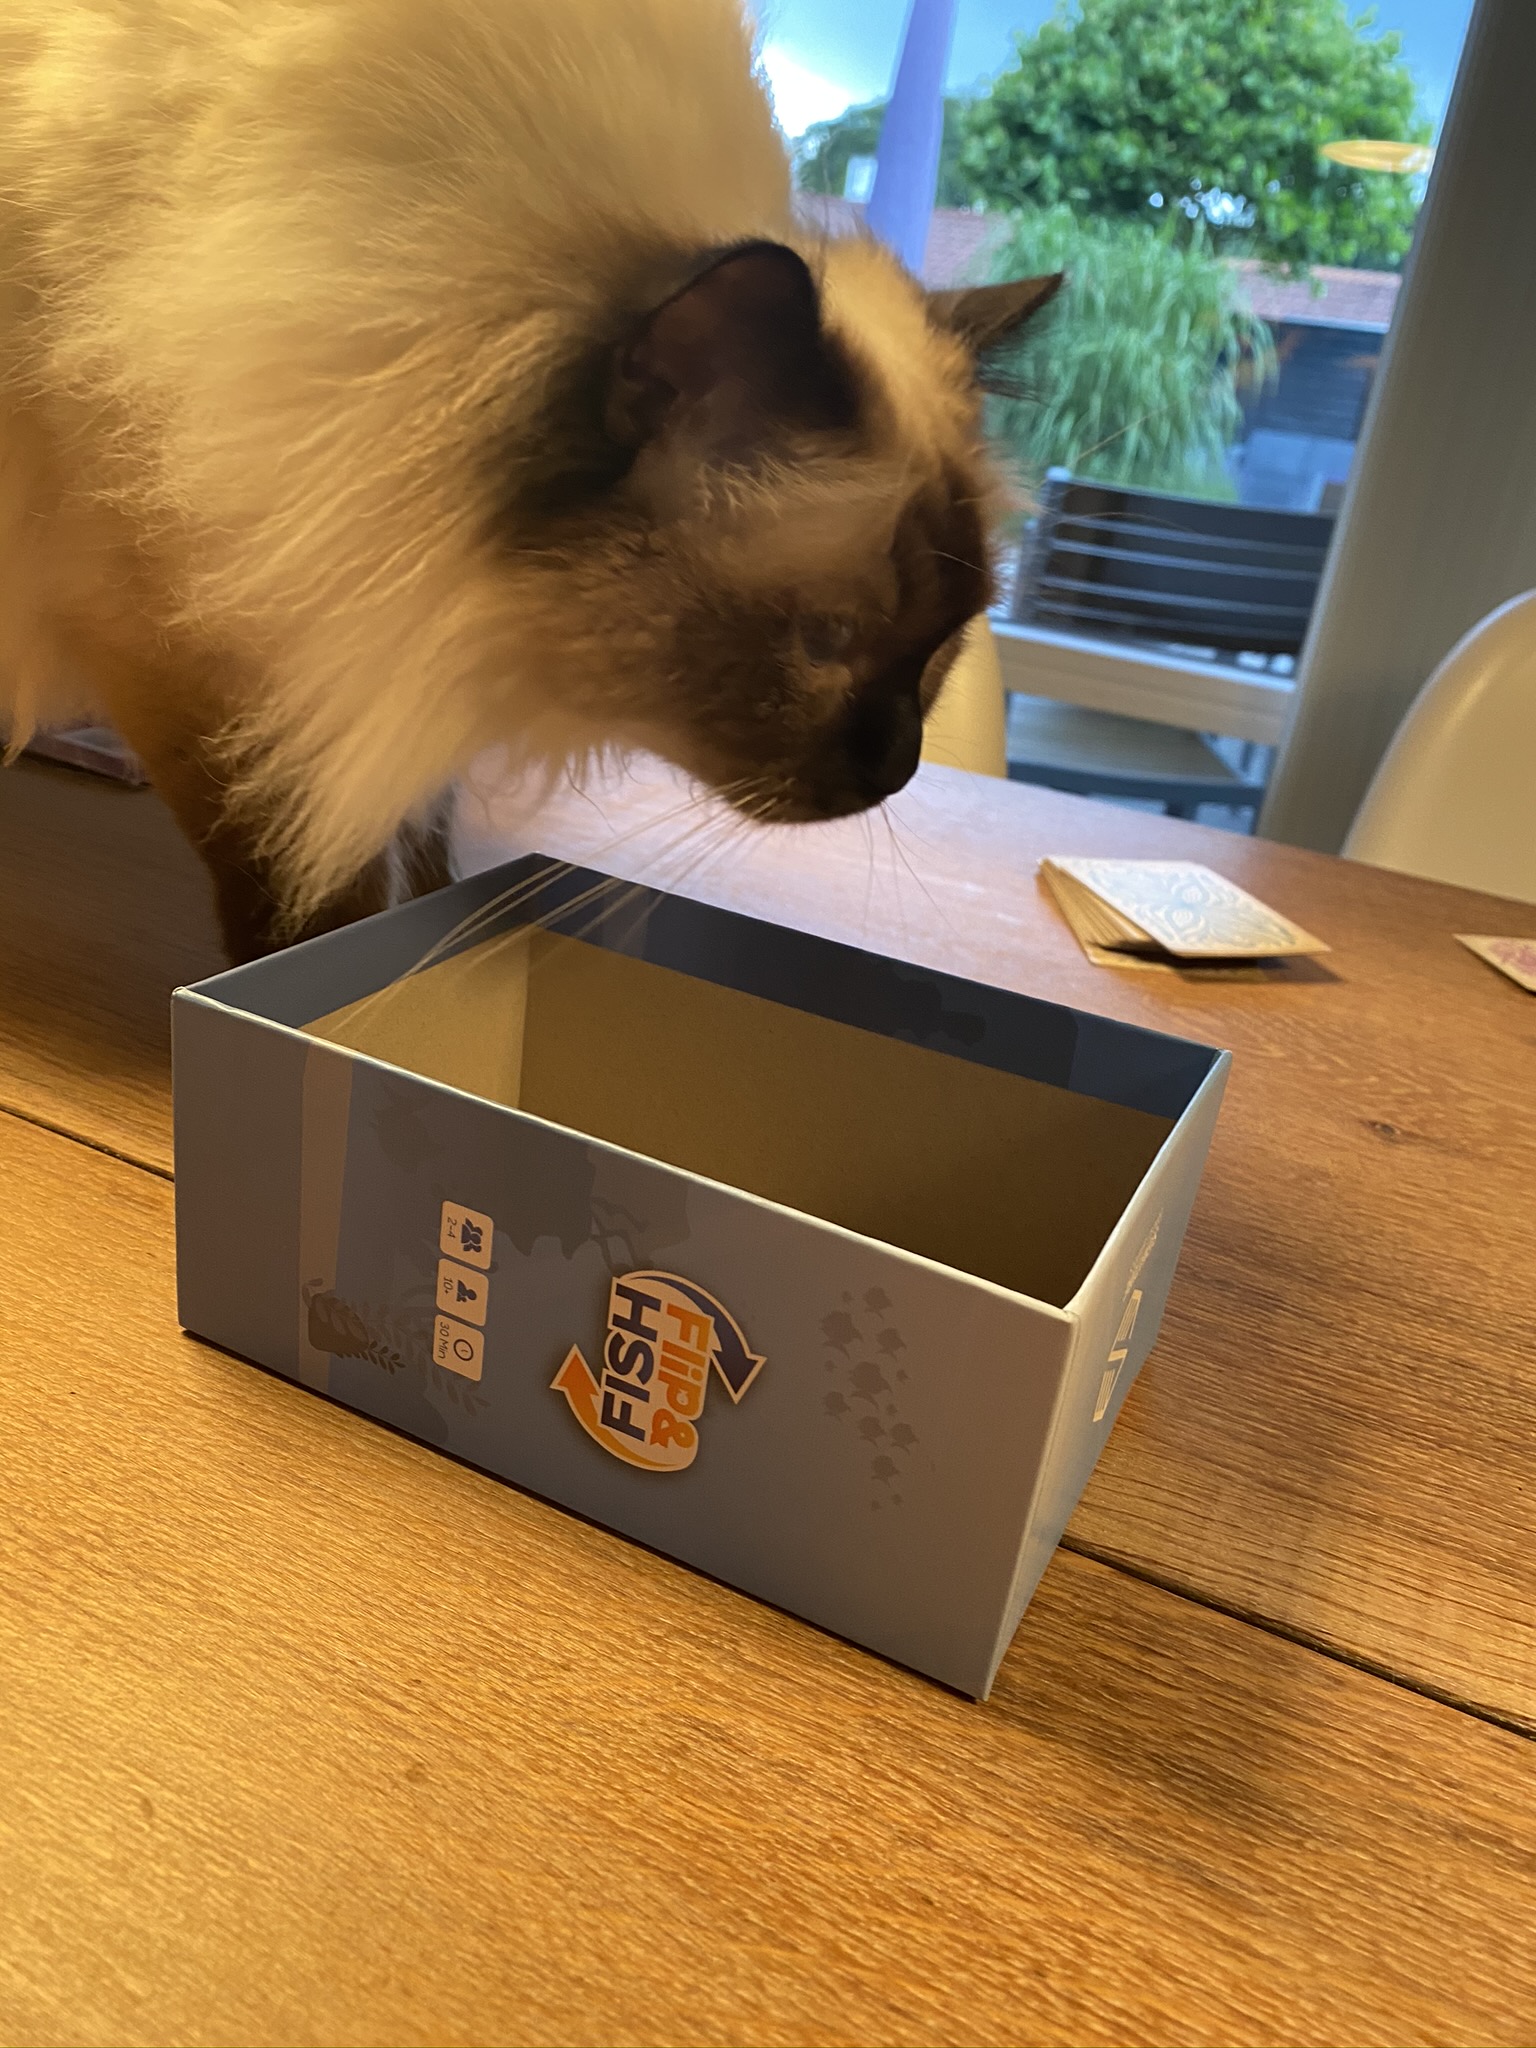 Helge inspecting the box - do I fit?